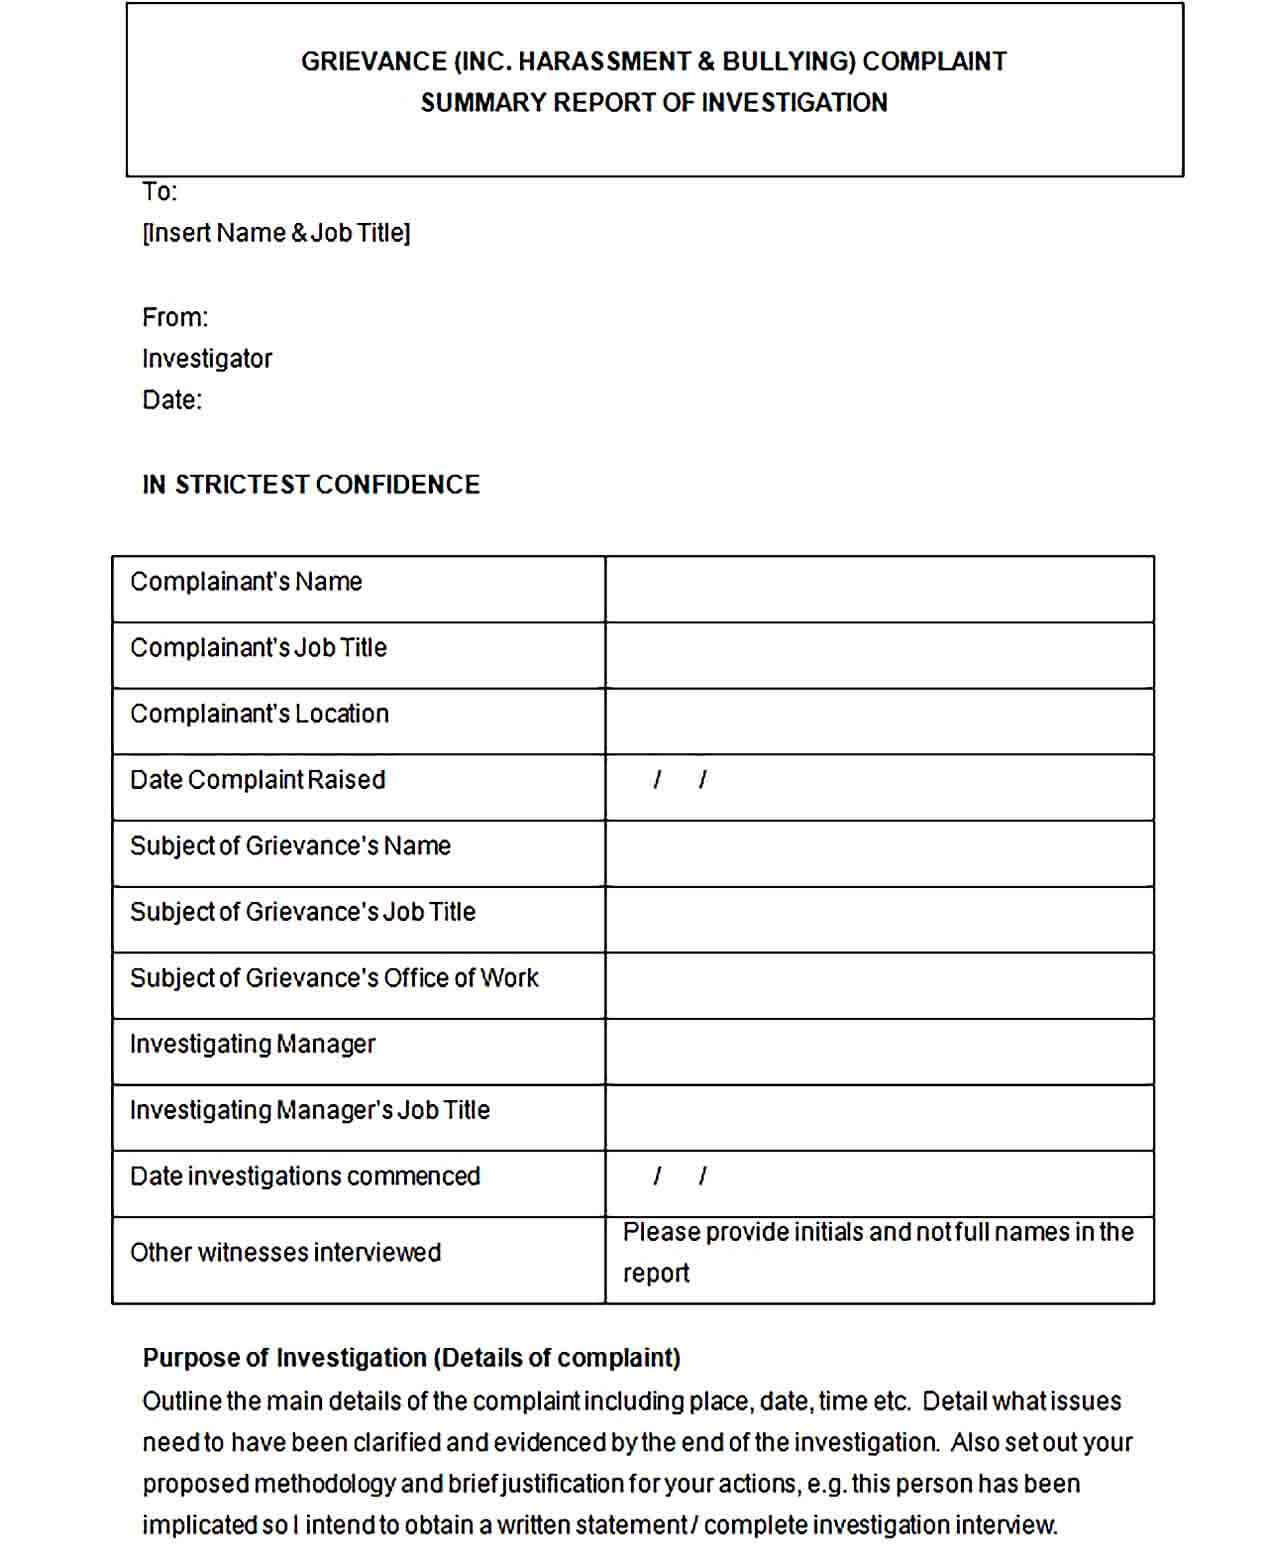 Sample grievance investigation report template 1